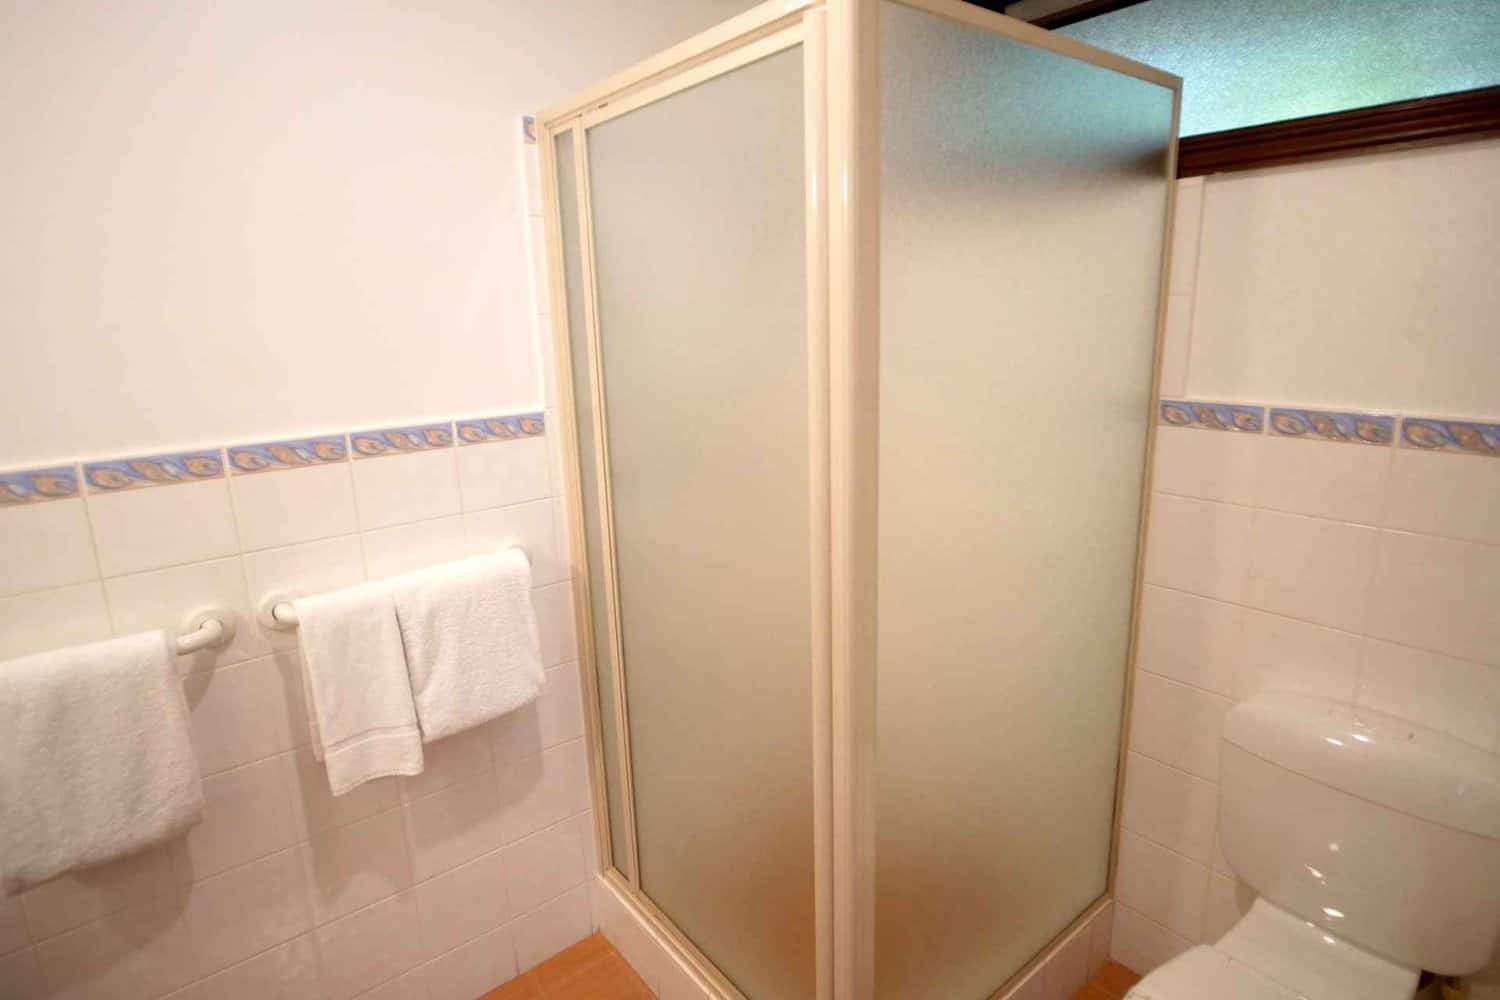 A simple 2.5-star hotel bathroom with basic fixtures, clean towels, and essential toiletries for a no-frills, budget-friendly experience.